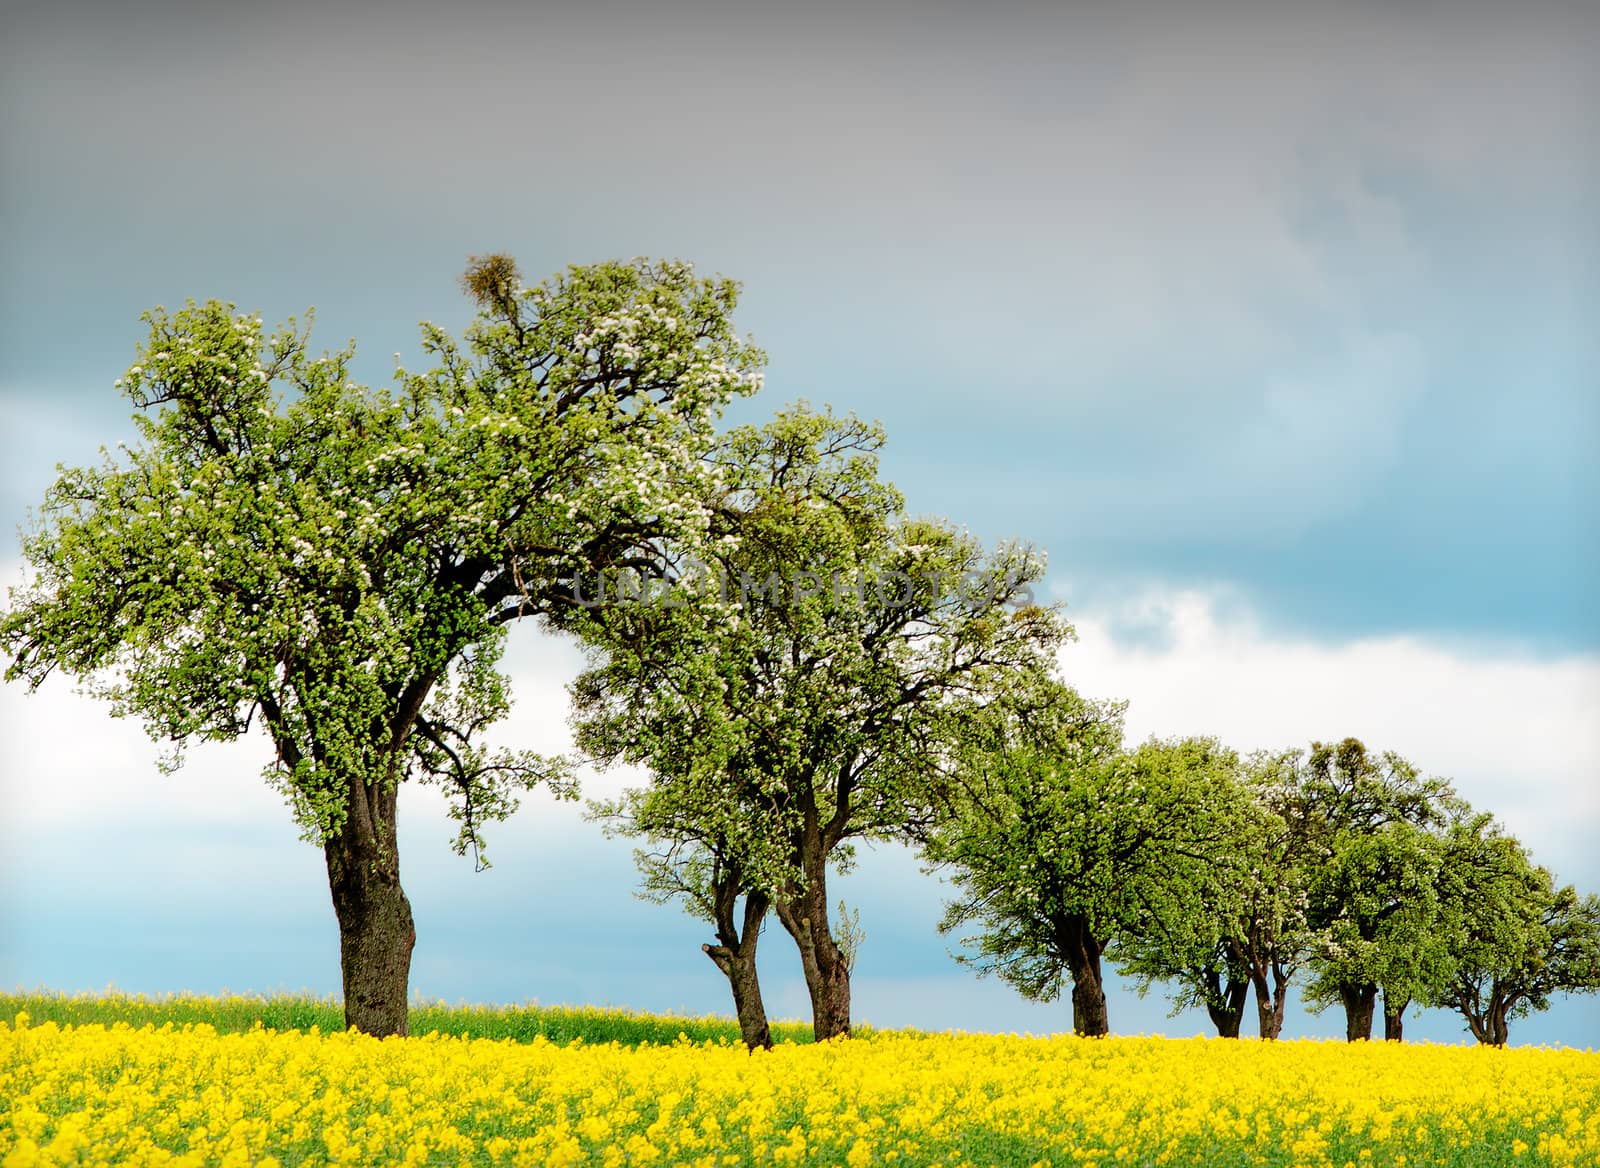 trees surrounded by rapeseed